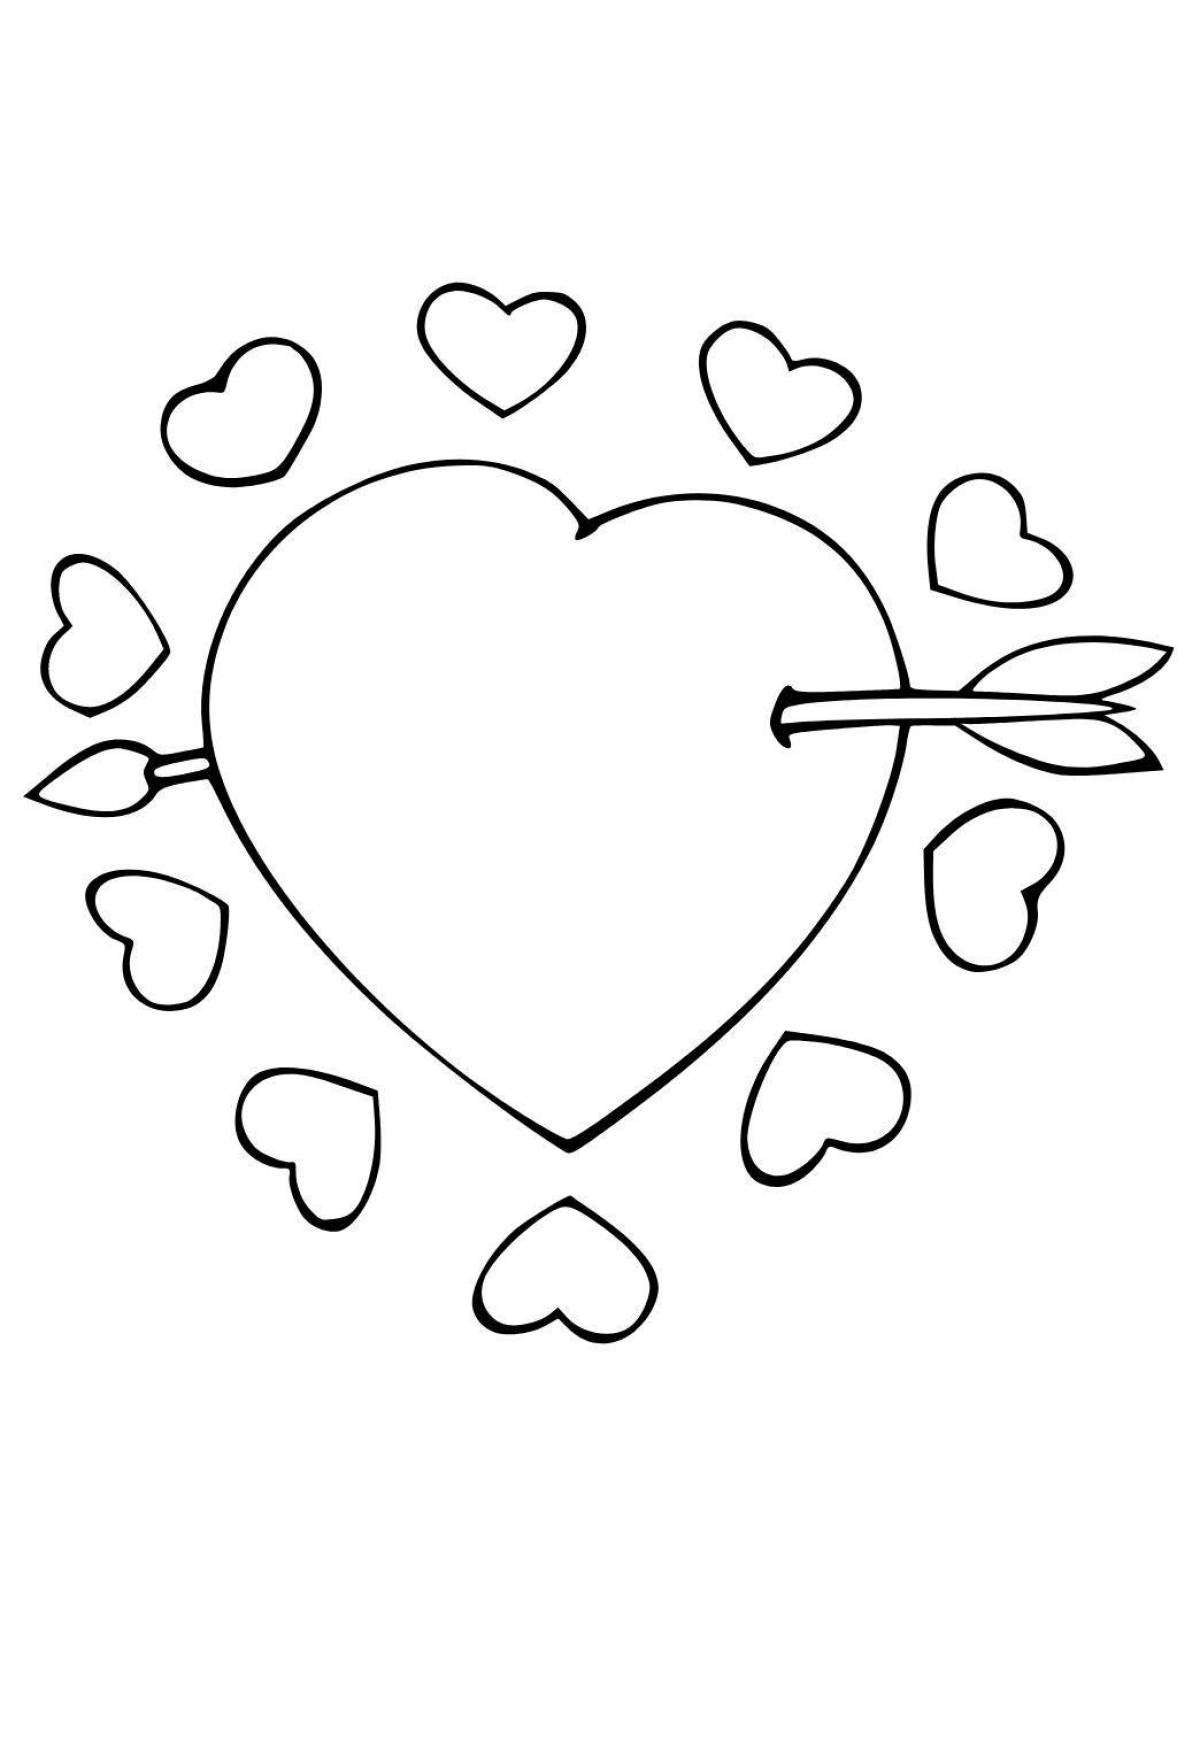 Adorable heart coloring page for 5-6 year olds